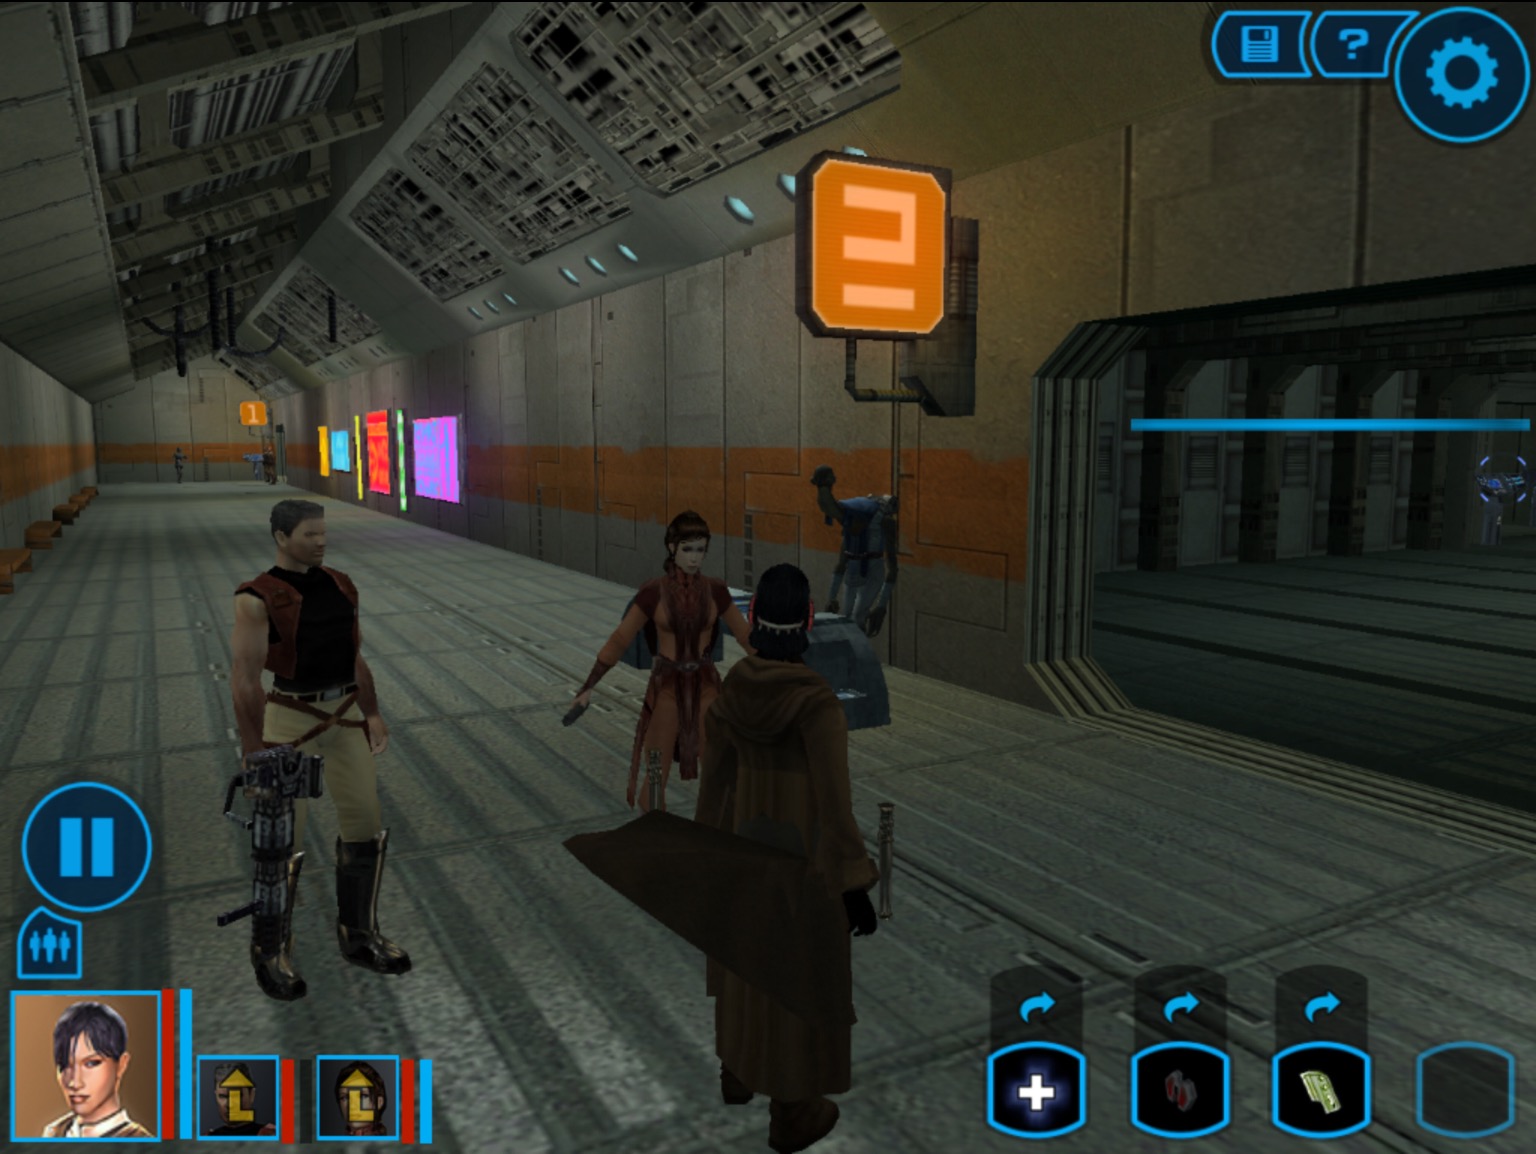 kotor 2 crashes after character creation windows 7